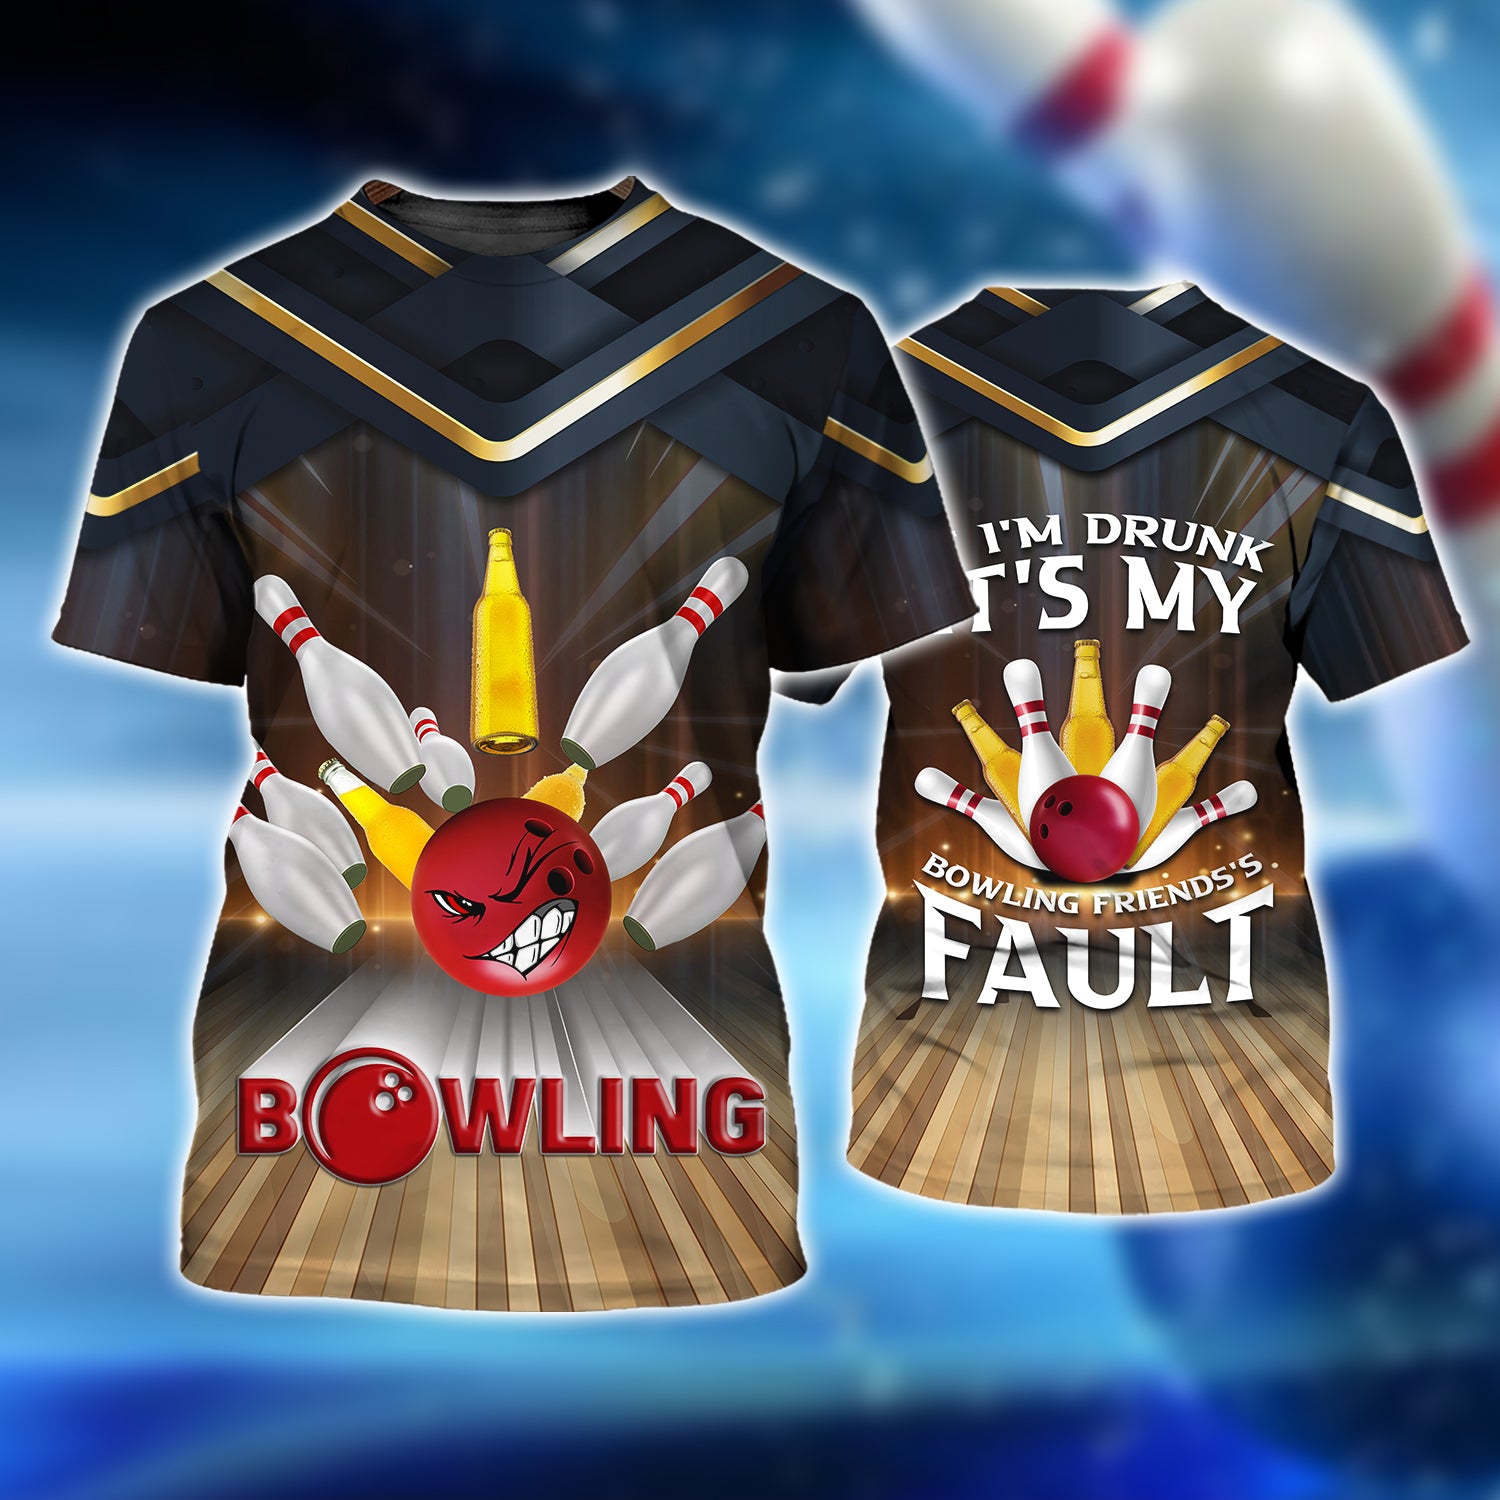 If I'm Drunk It's My Bowling Friend's Fault Beer Bowler Roll 3D Tshirt QB95